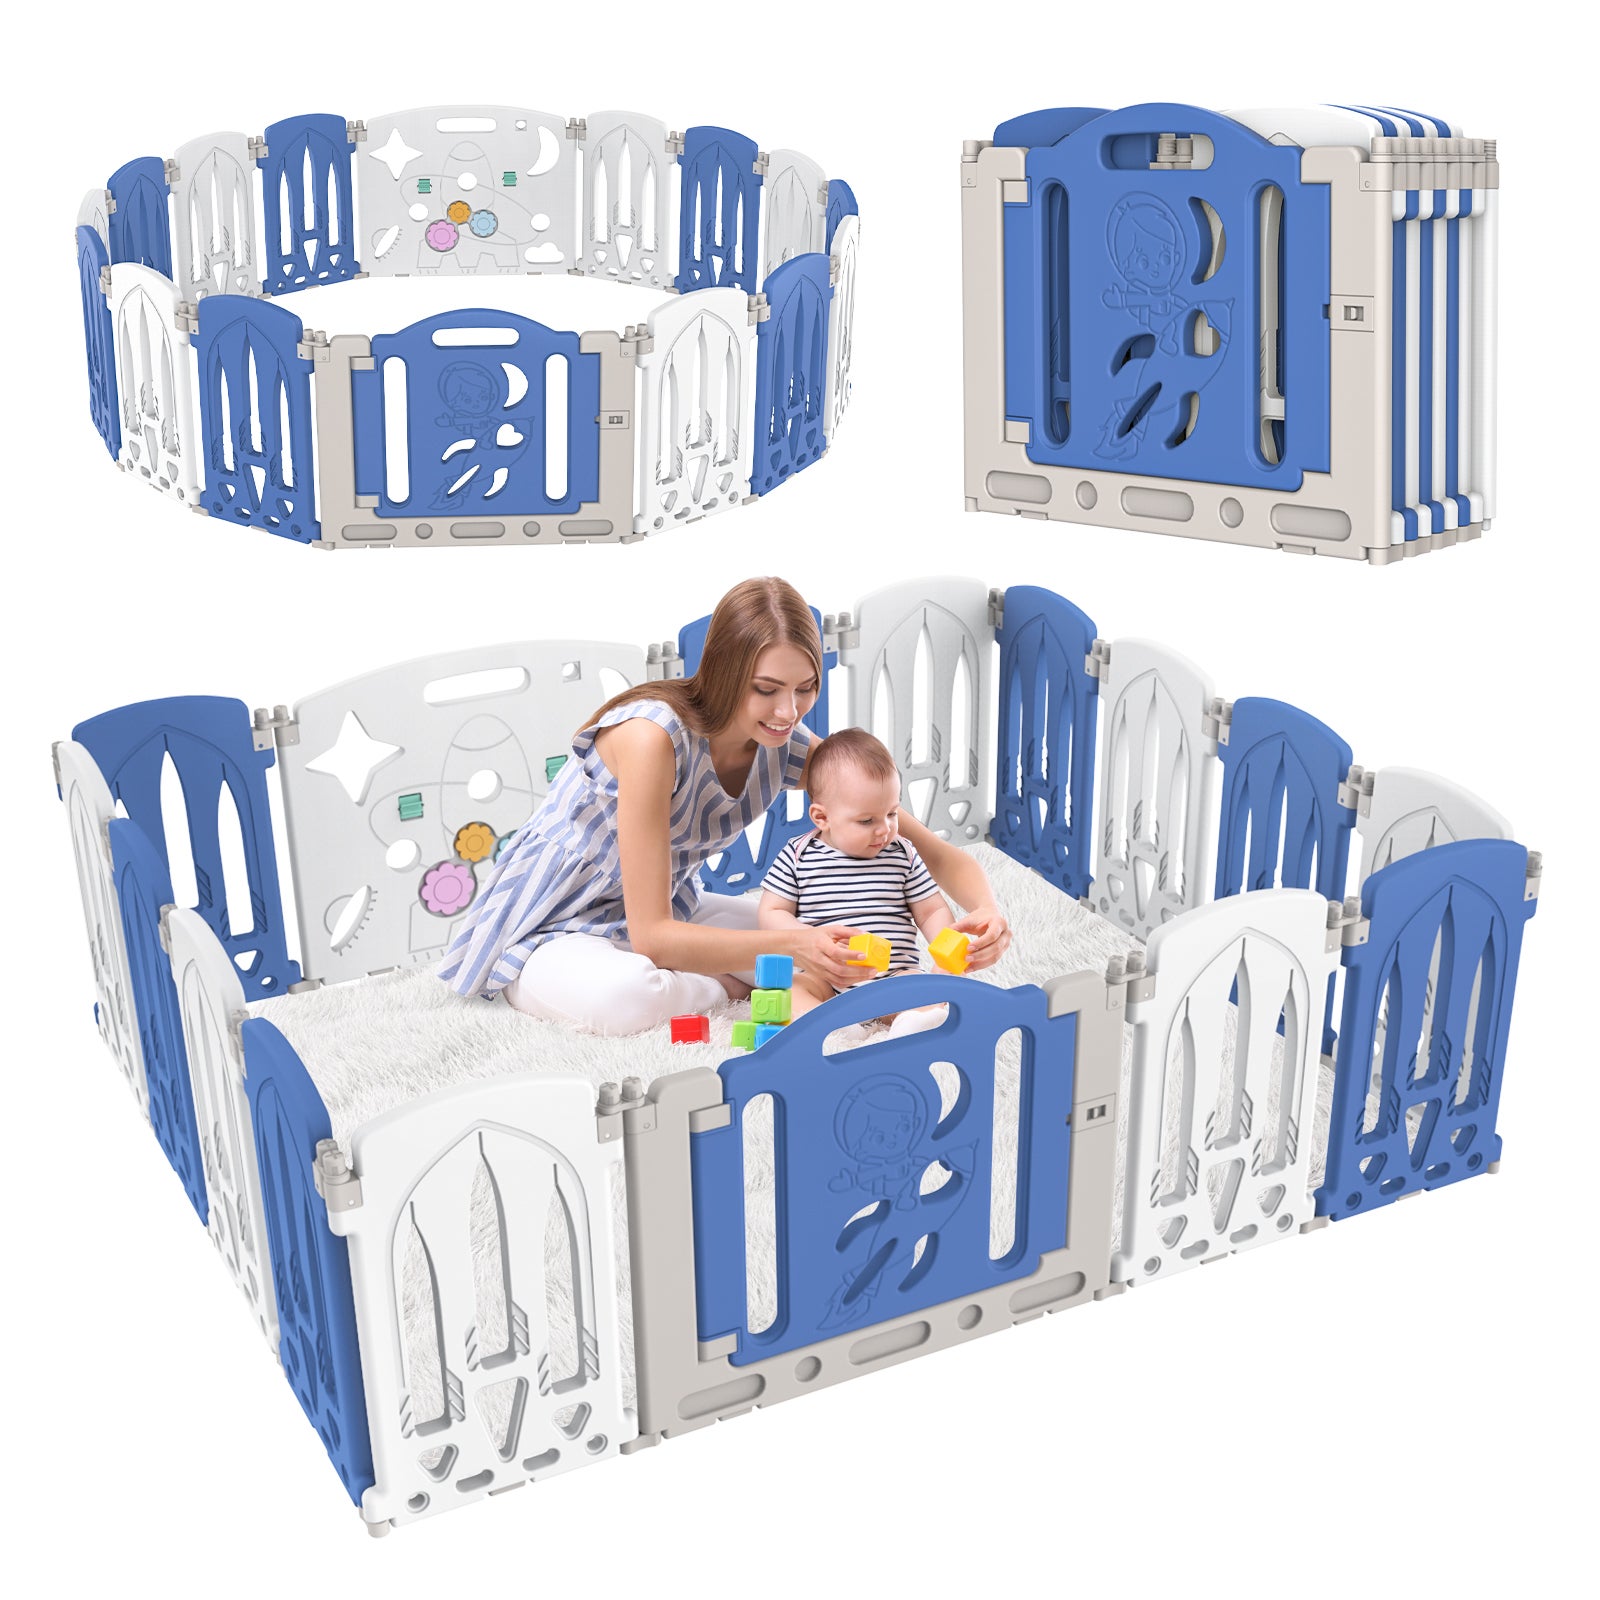 Advwin 16/18/20/22 Panels Baby PlayPen with Foldable Safety Gate Toddler Fence Yard